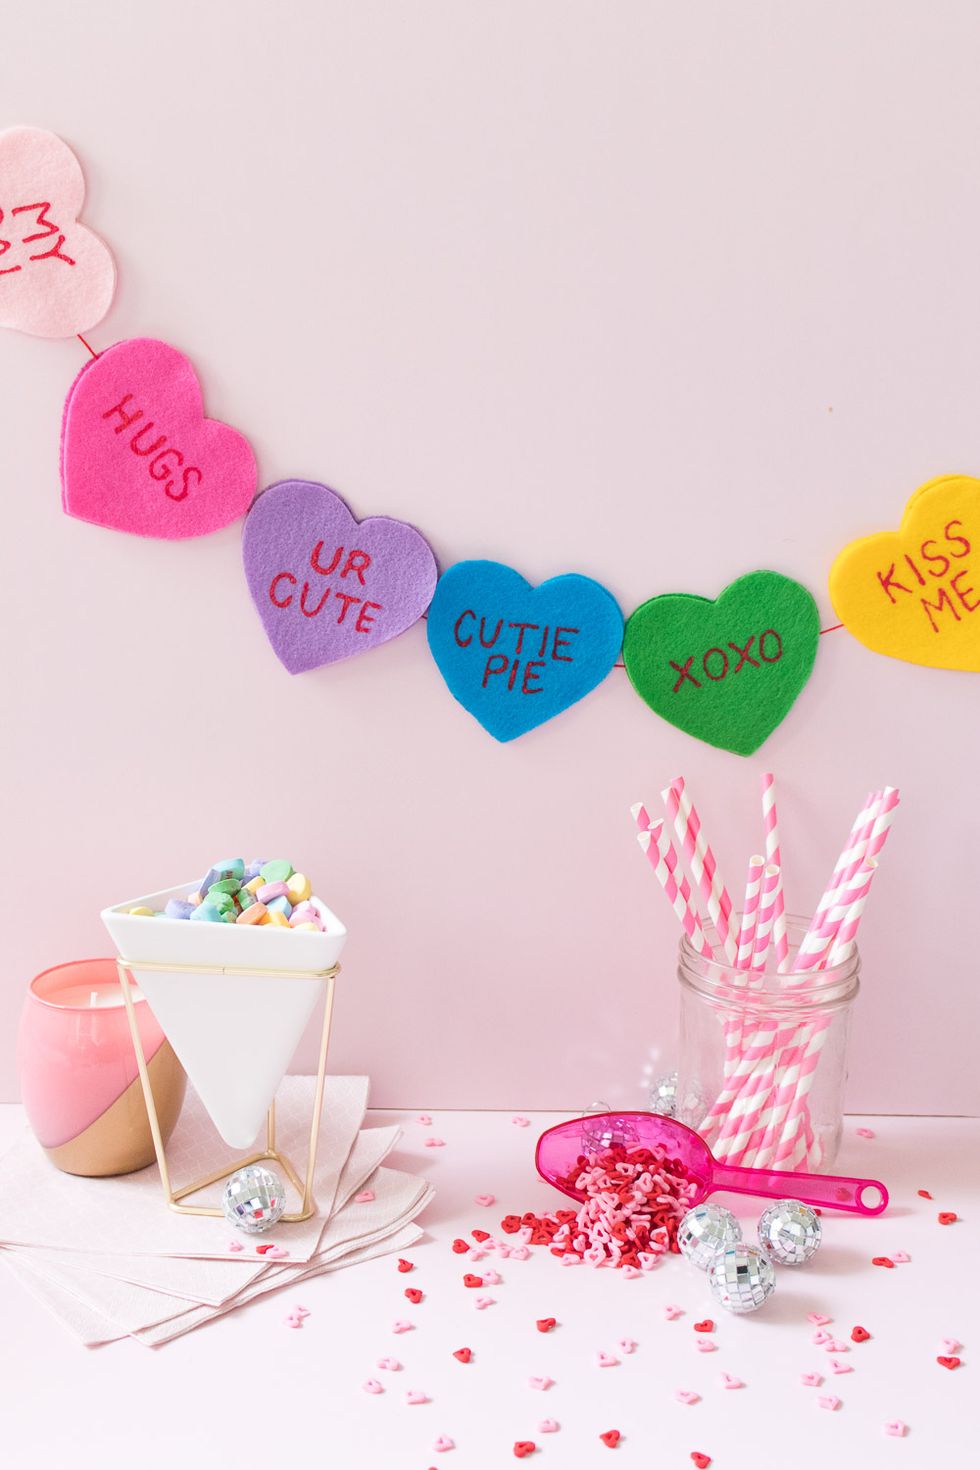 Paper Heart Decorations for Fun Holiday Decor - DIY Candy